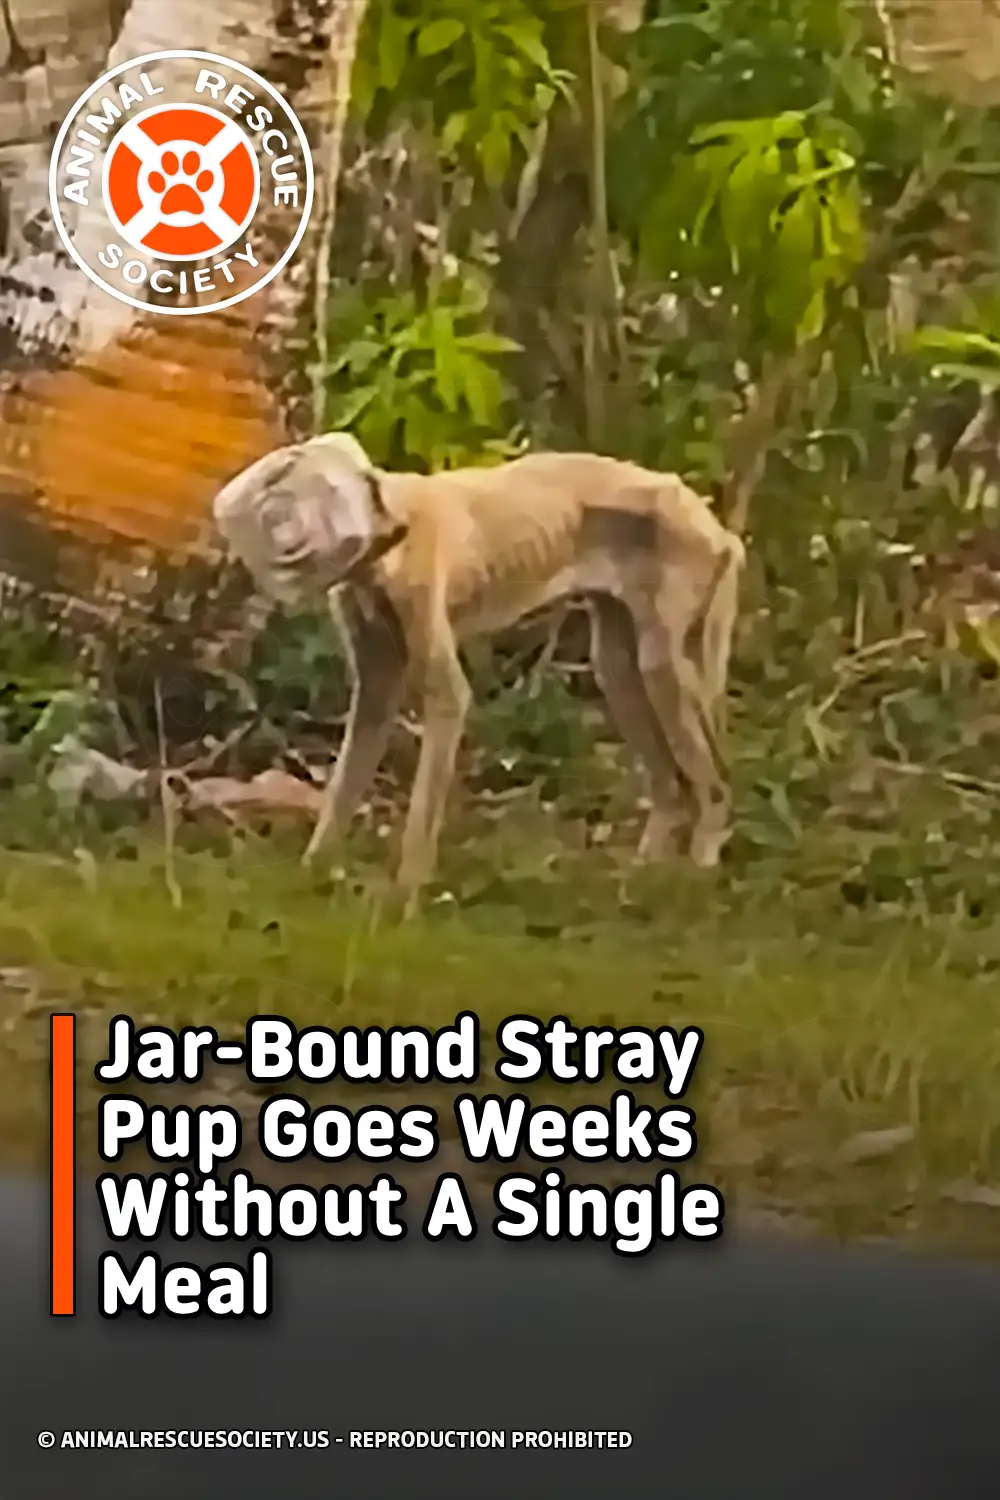 Jar-Bound Stray Pup Goes Weeks Without A Single Meal